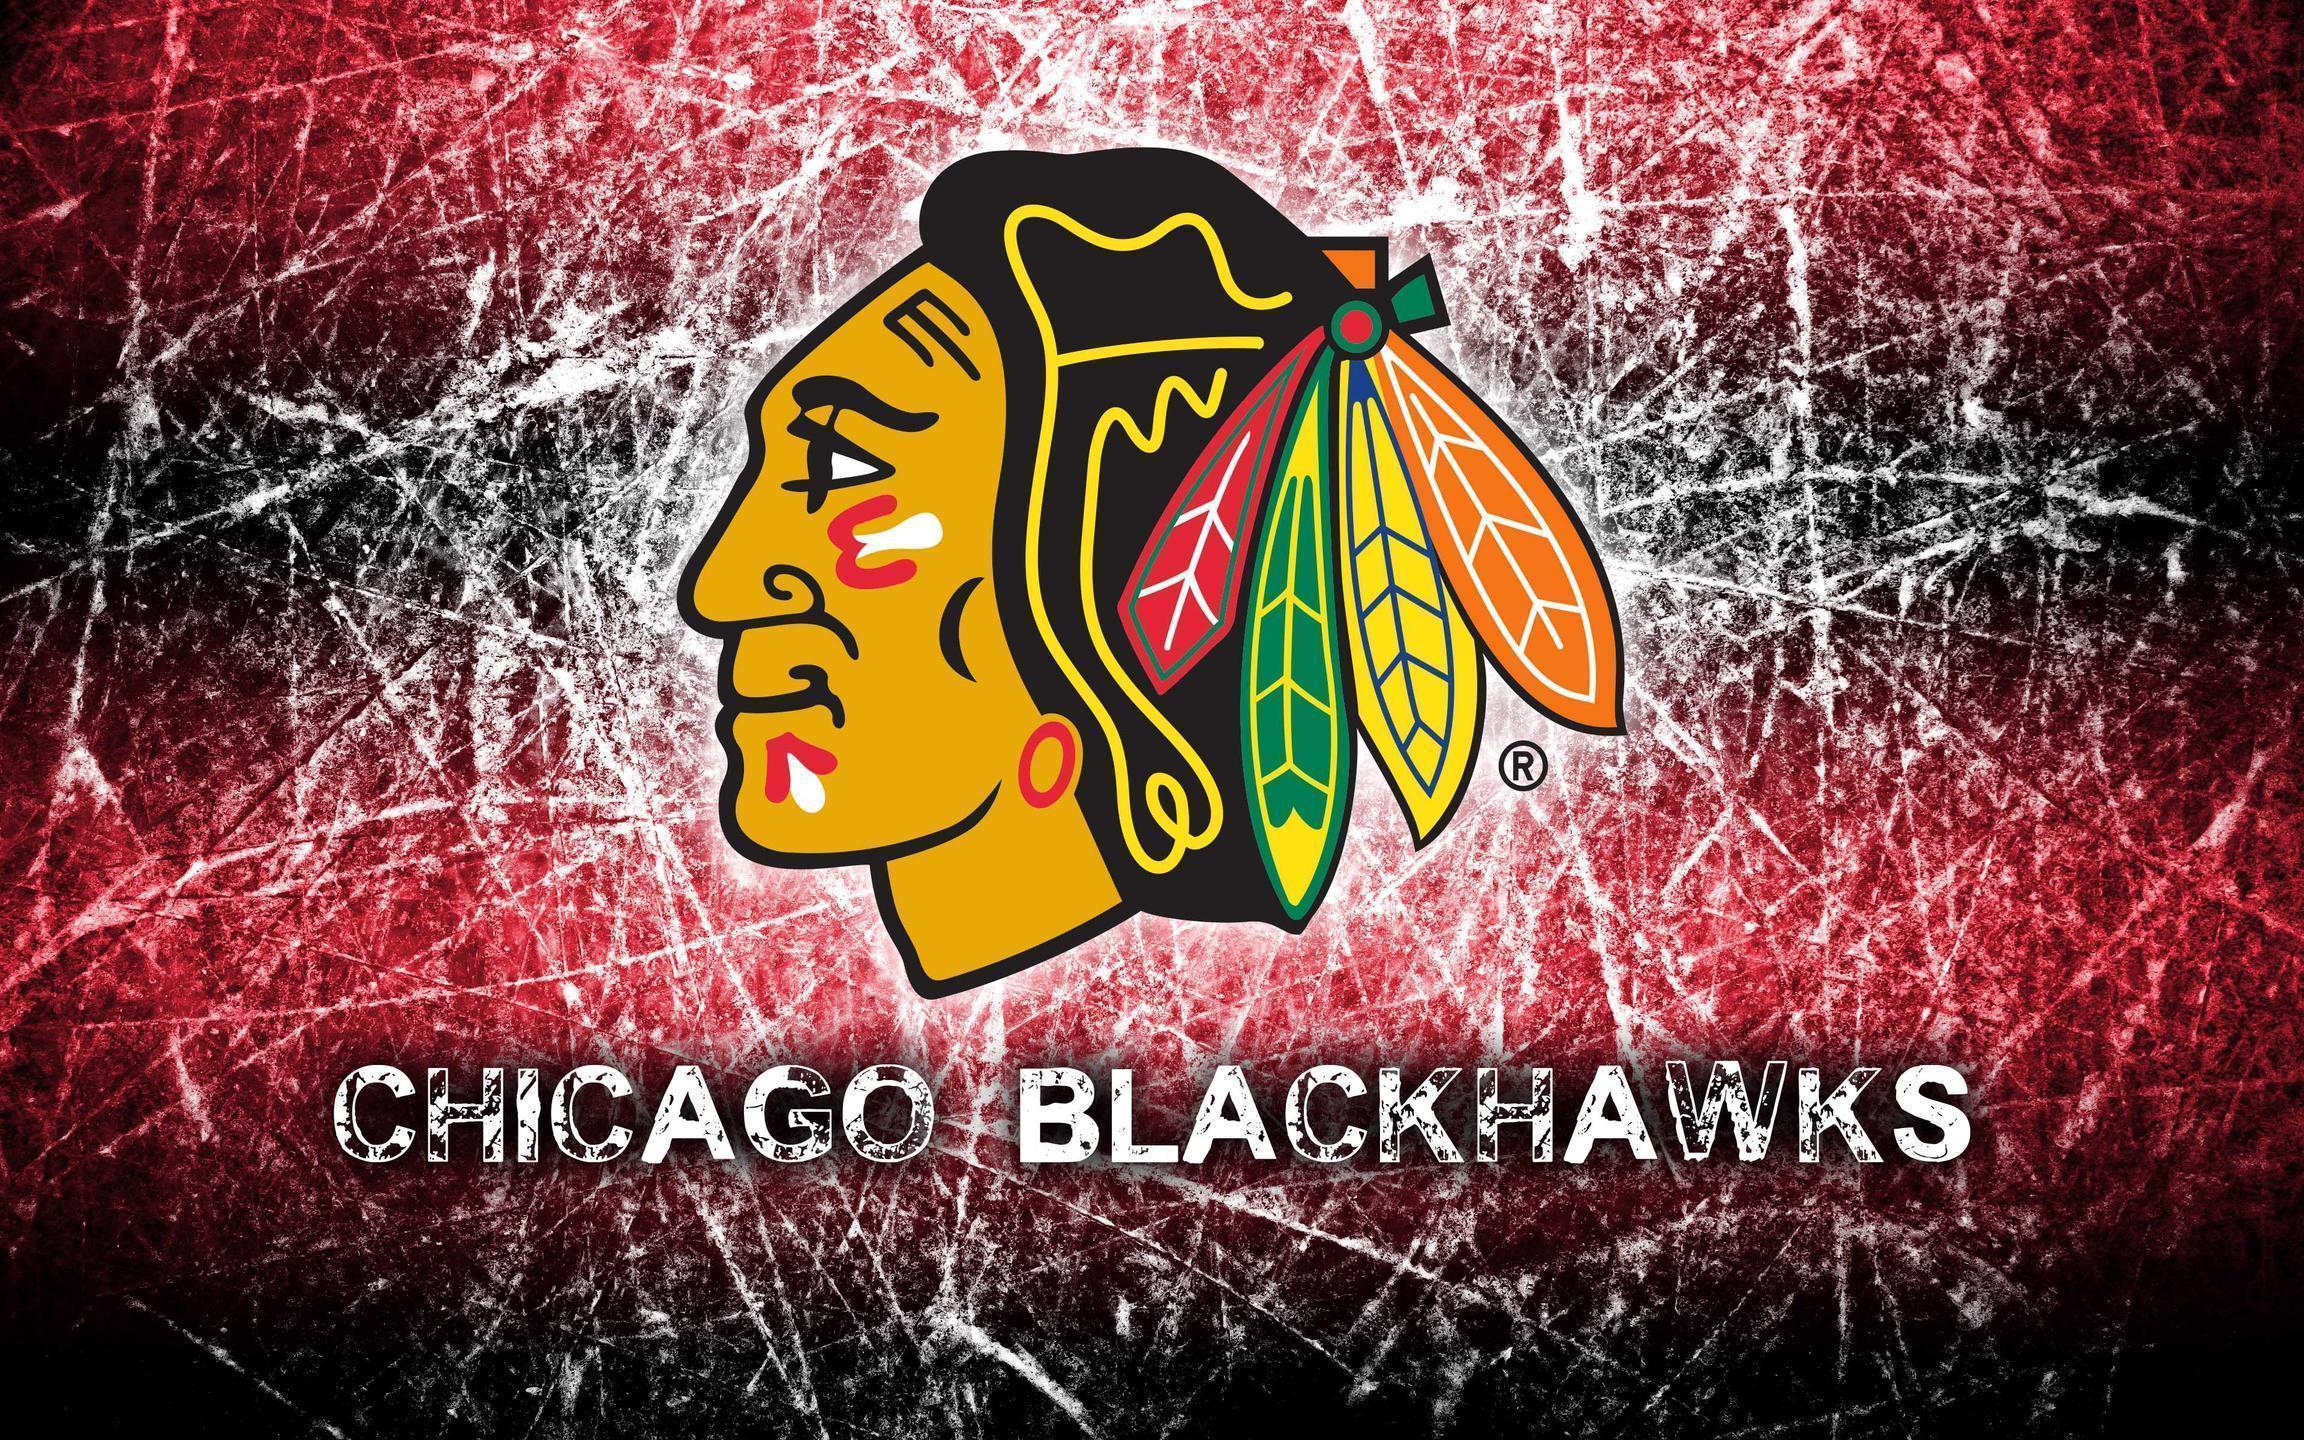 Chicago Blackhawks 2014 Logo Wallpapers Wide or HD